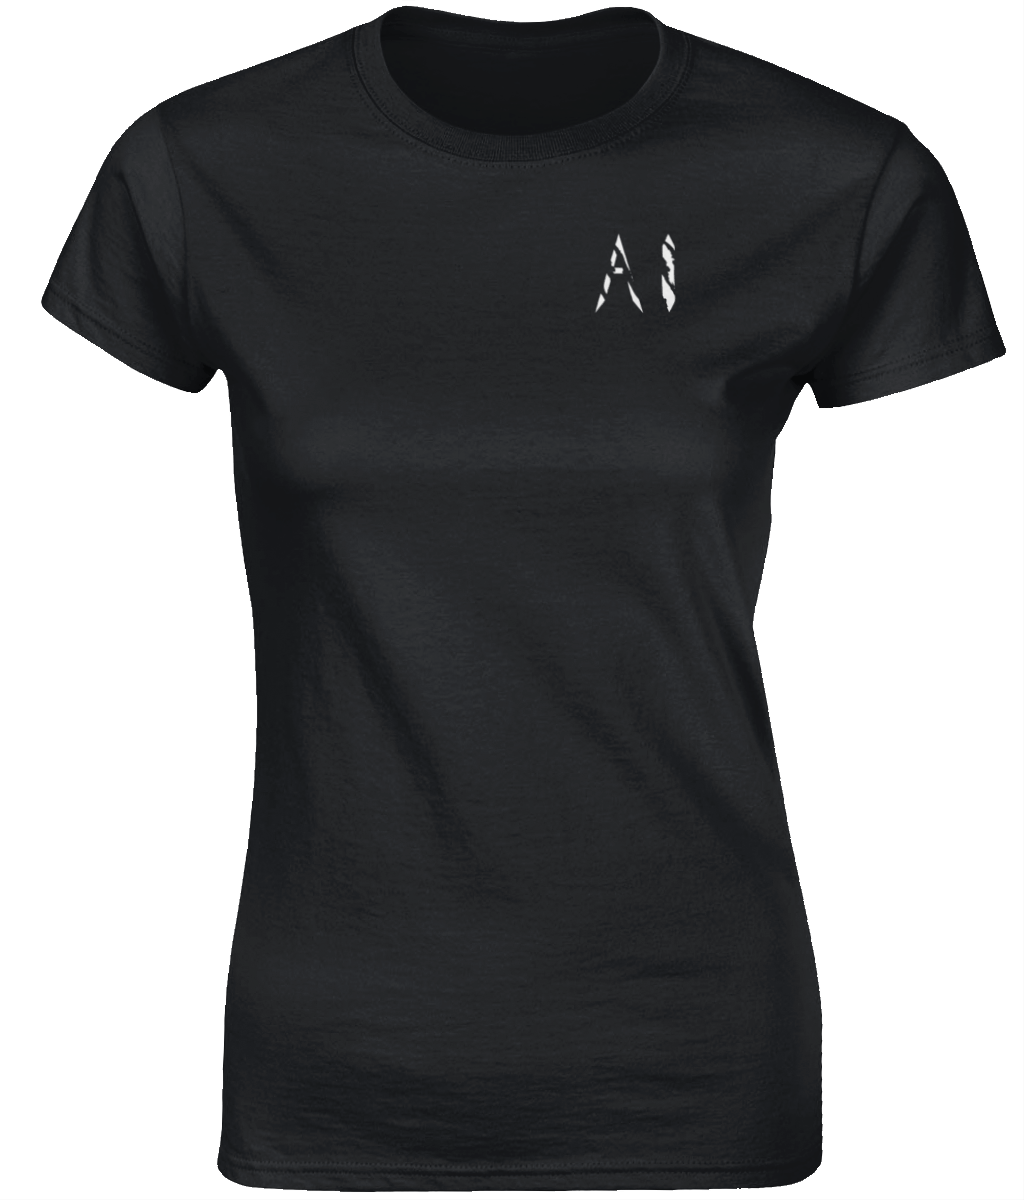 Womens black Fitted Ringspun T-Shirt with White AI logo on left breast